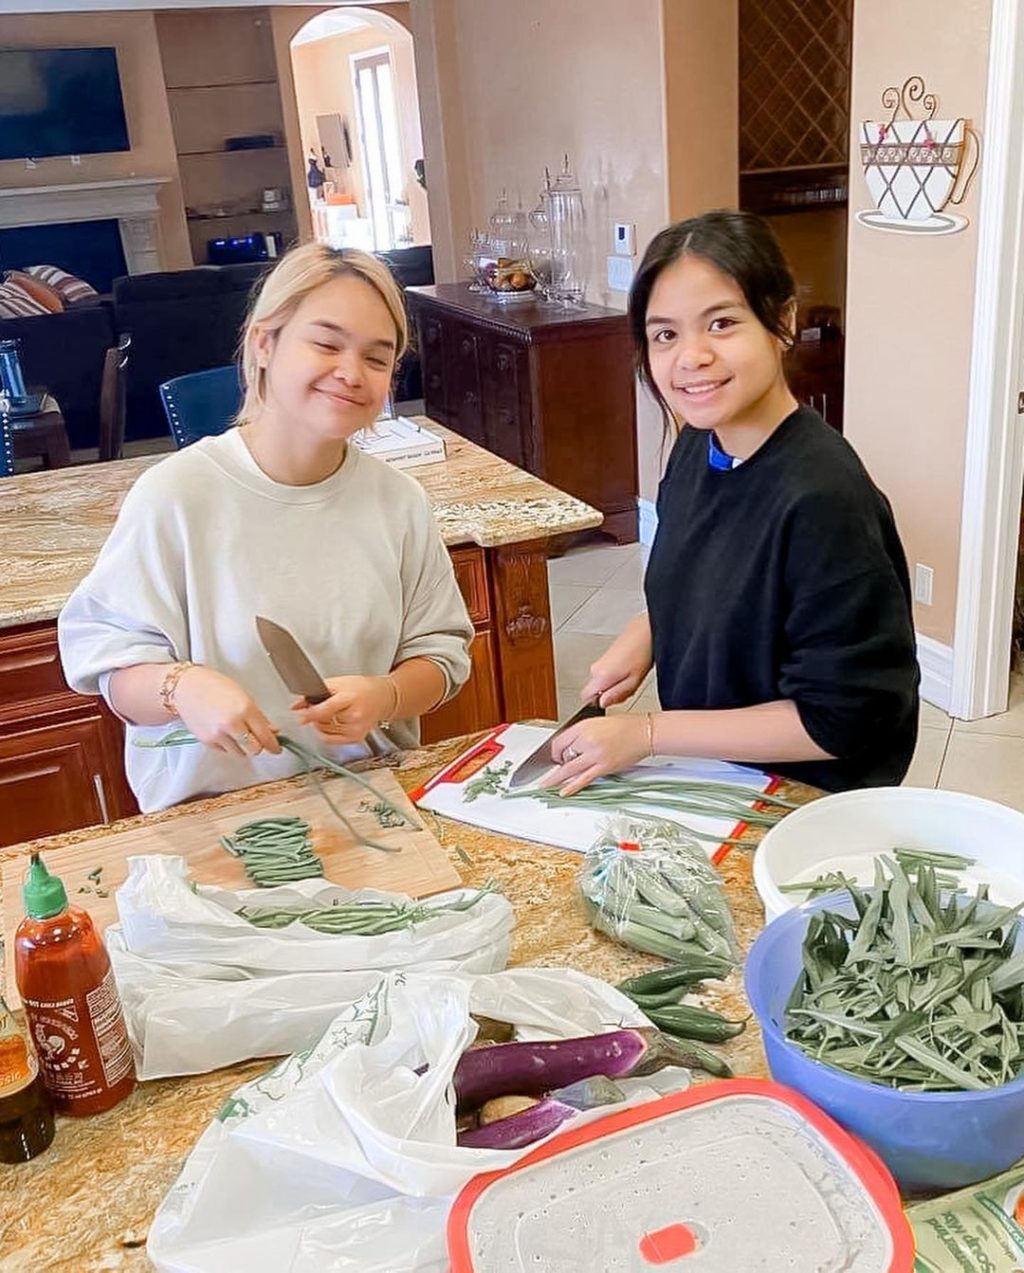 JINKEE PACQUIAO SHOWS A PROUD MOM MOMENT OF HER DAUGHTERS LEARNING TO COOK. In photo are Jinkee Pacquiao's daughters preparing things to cook.